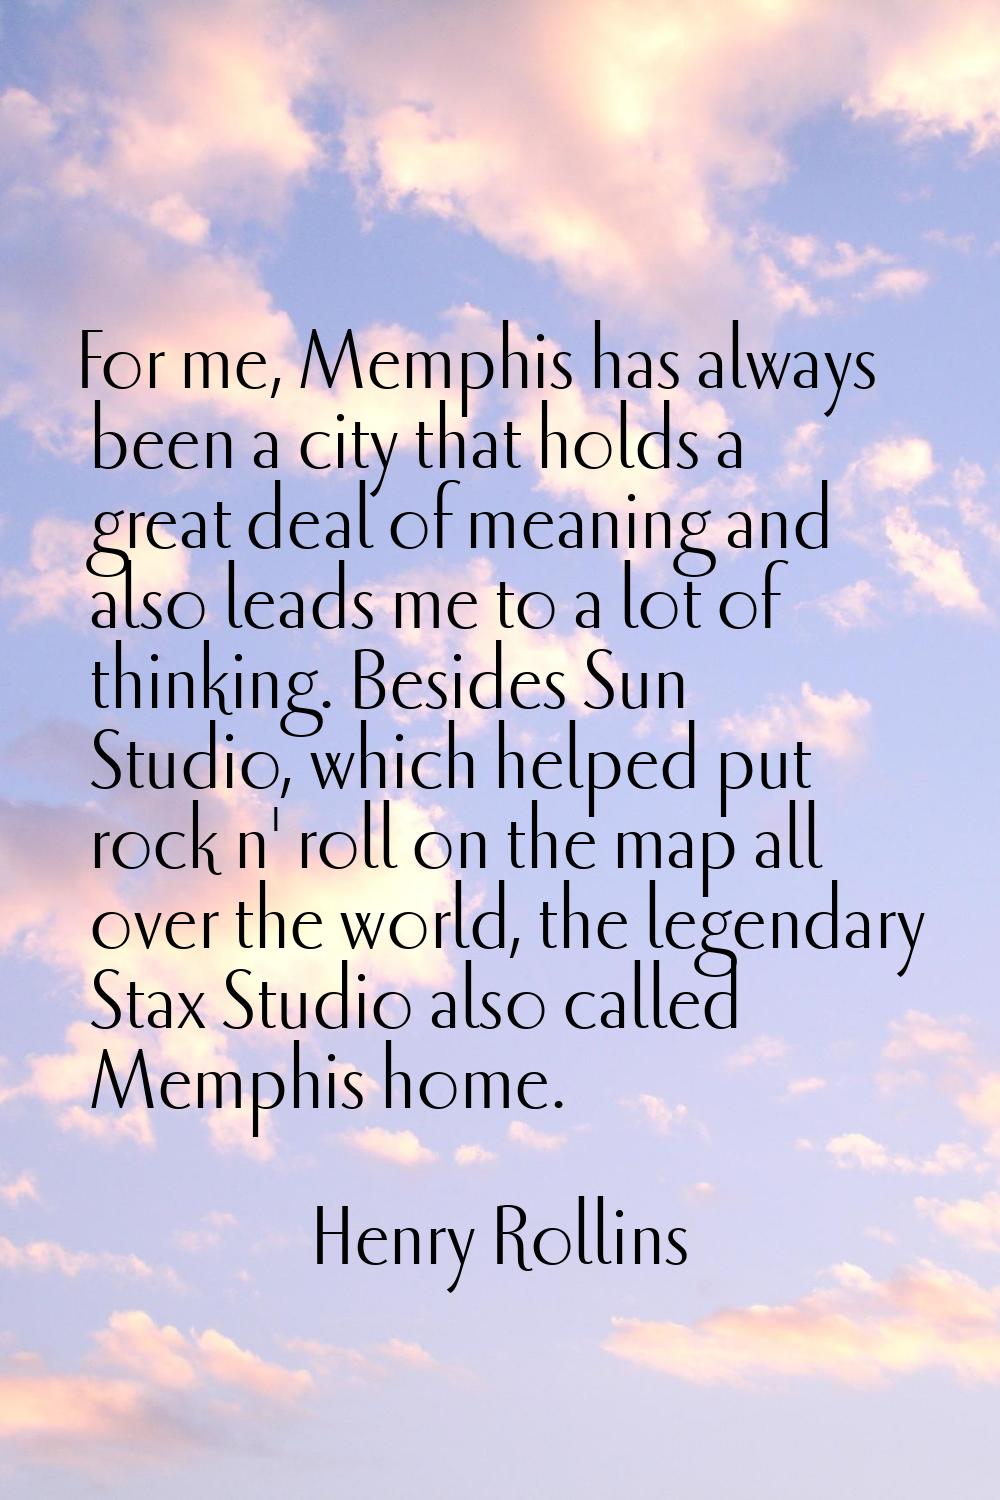 For me, Memphis has always been a city that holds a great deal of meaning and also leads me to a lo